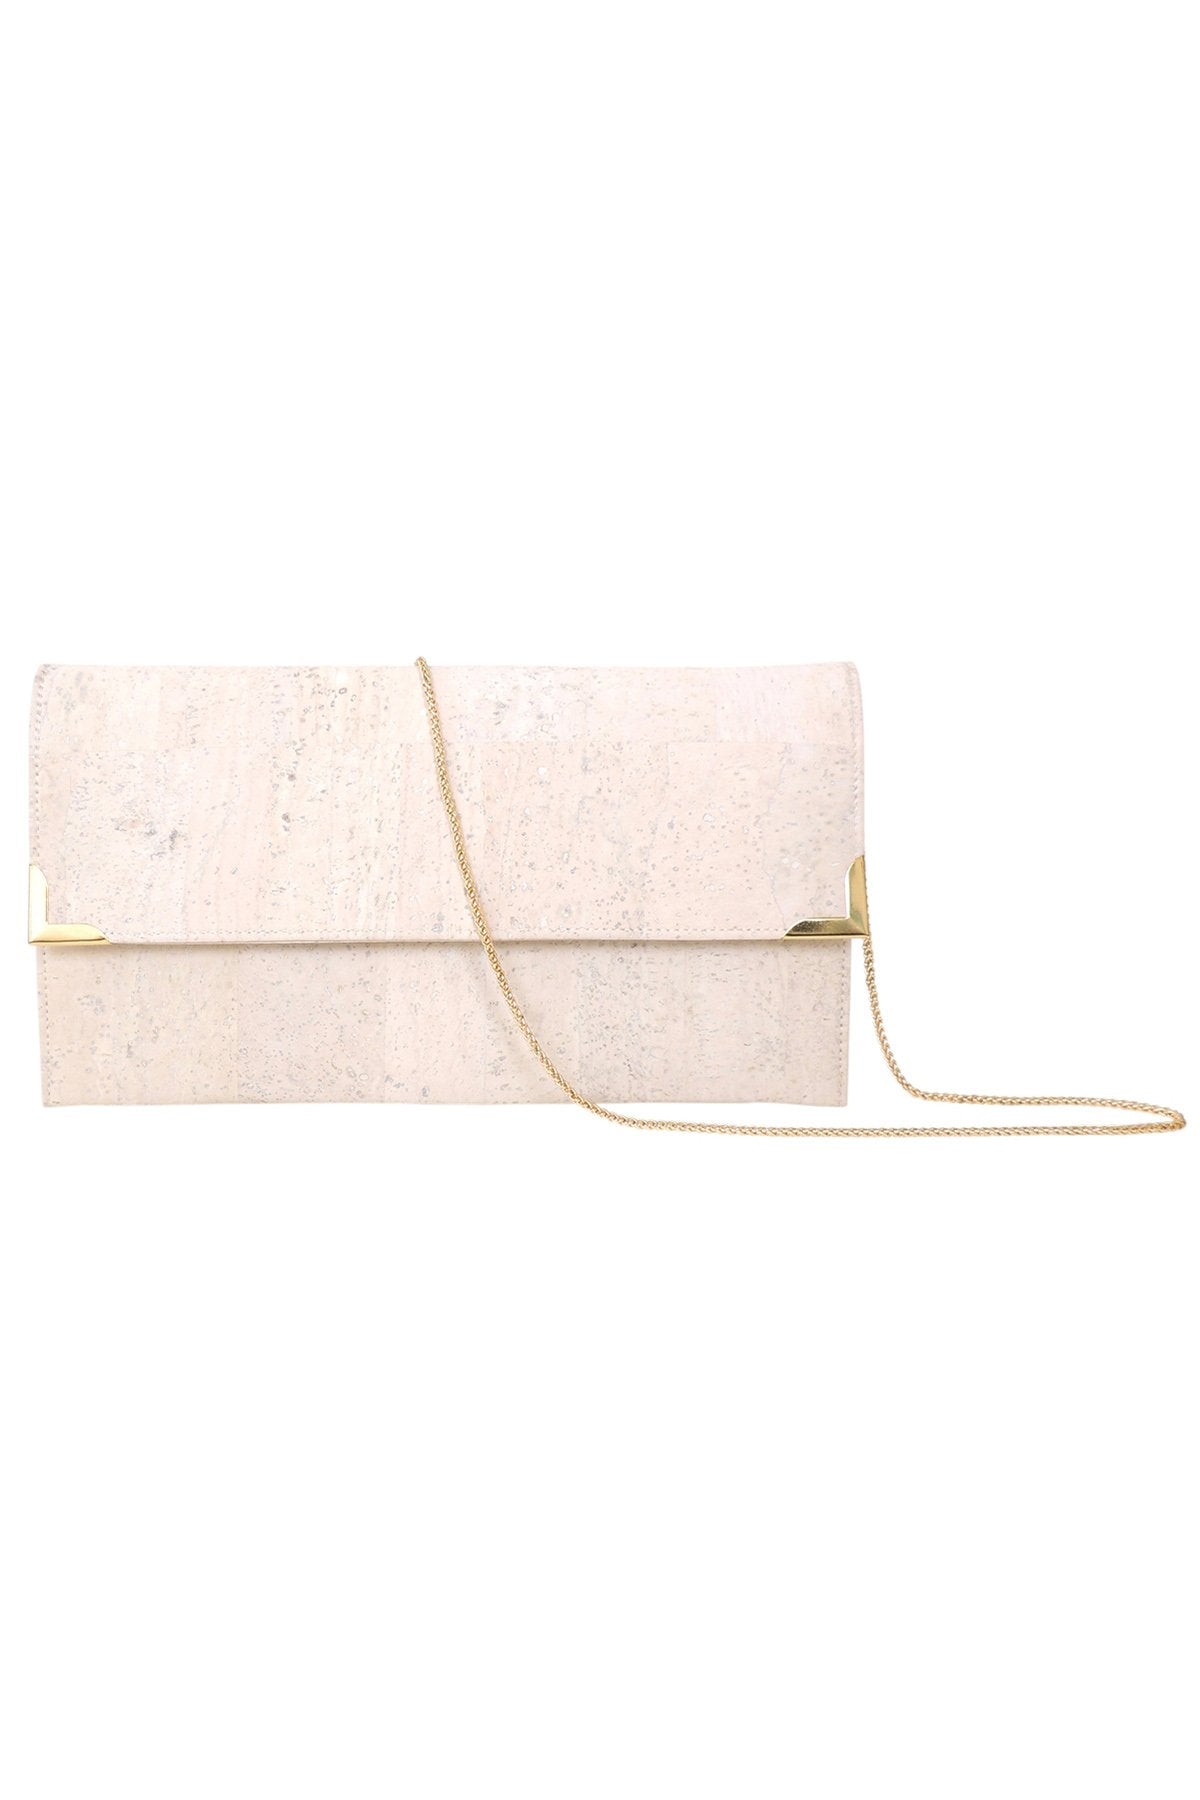 FOLIO CLUTCH BAG Spicer Bags WHITE One Size 